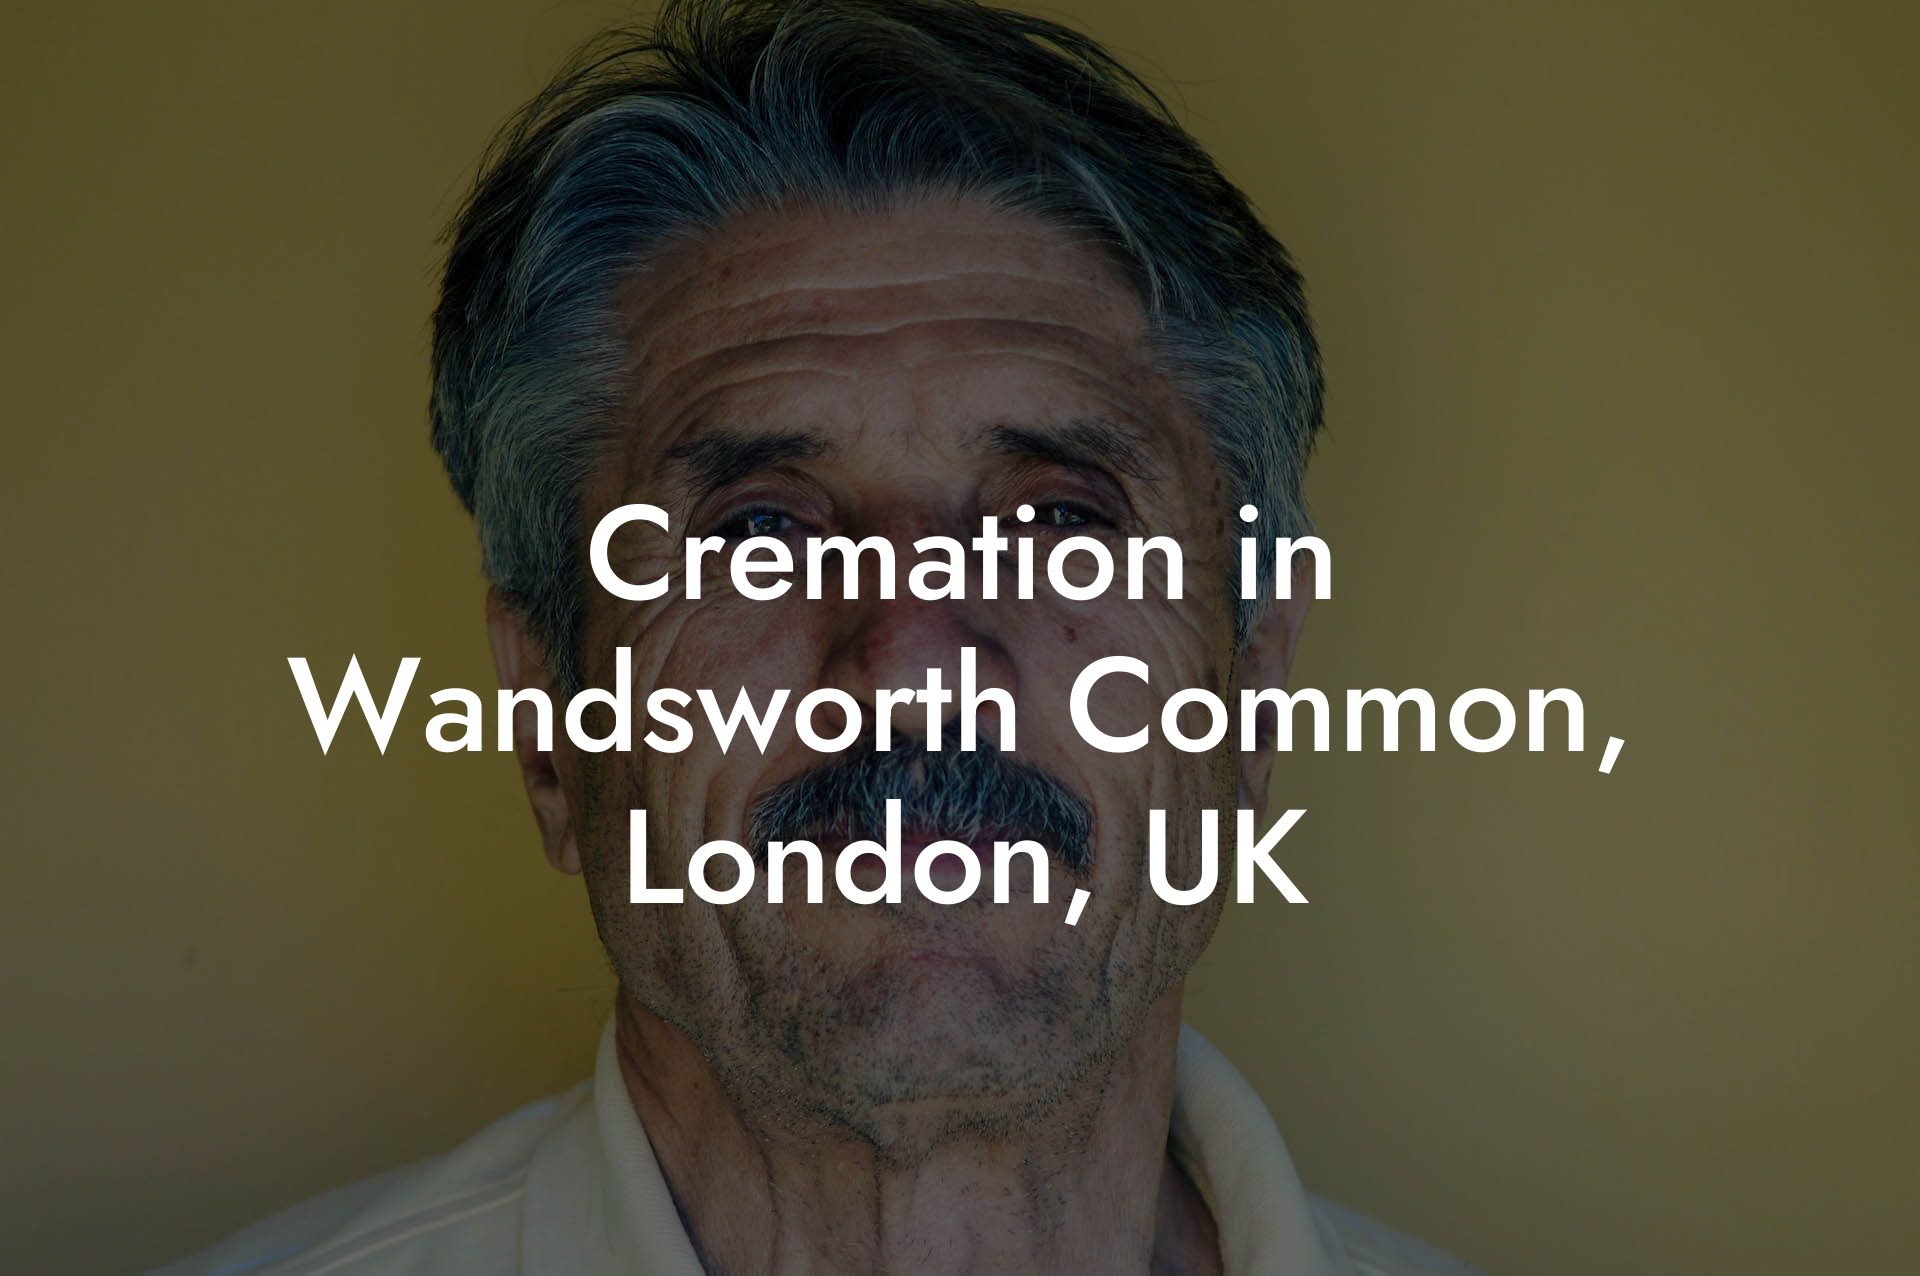 Cremation in Wandsworth Common, London, UK